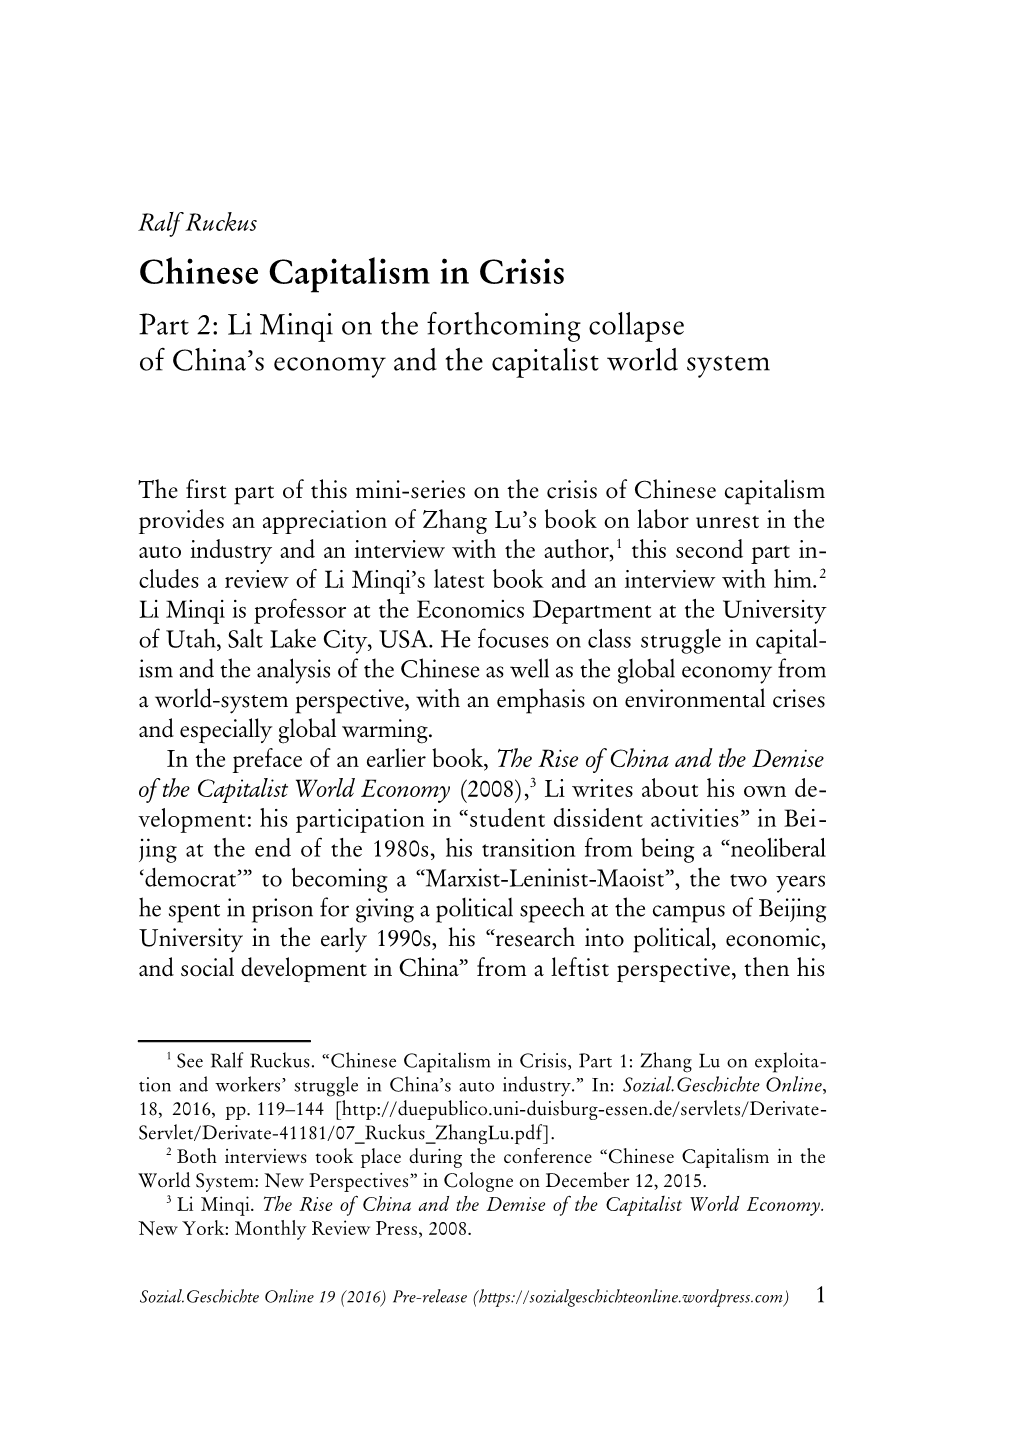 Chinese Capitalism in Crisis Part 2: Li Minqi on the Forthcoming Collapse of China’S Economy and the Capitalist World System